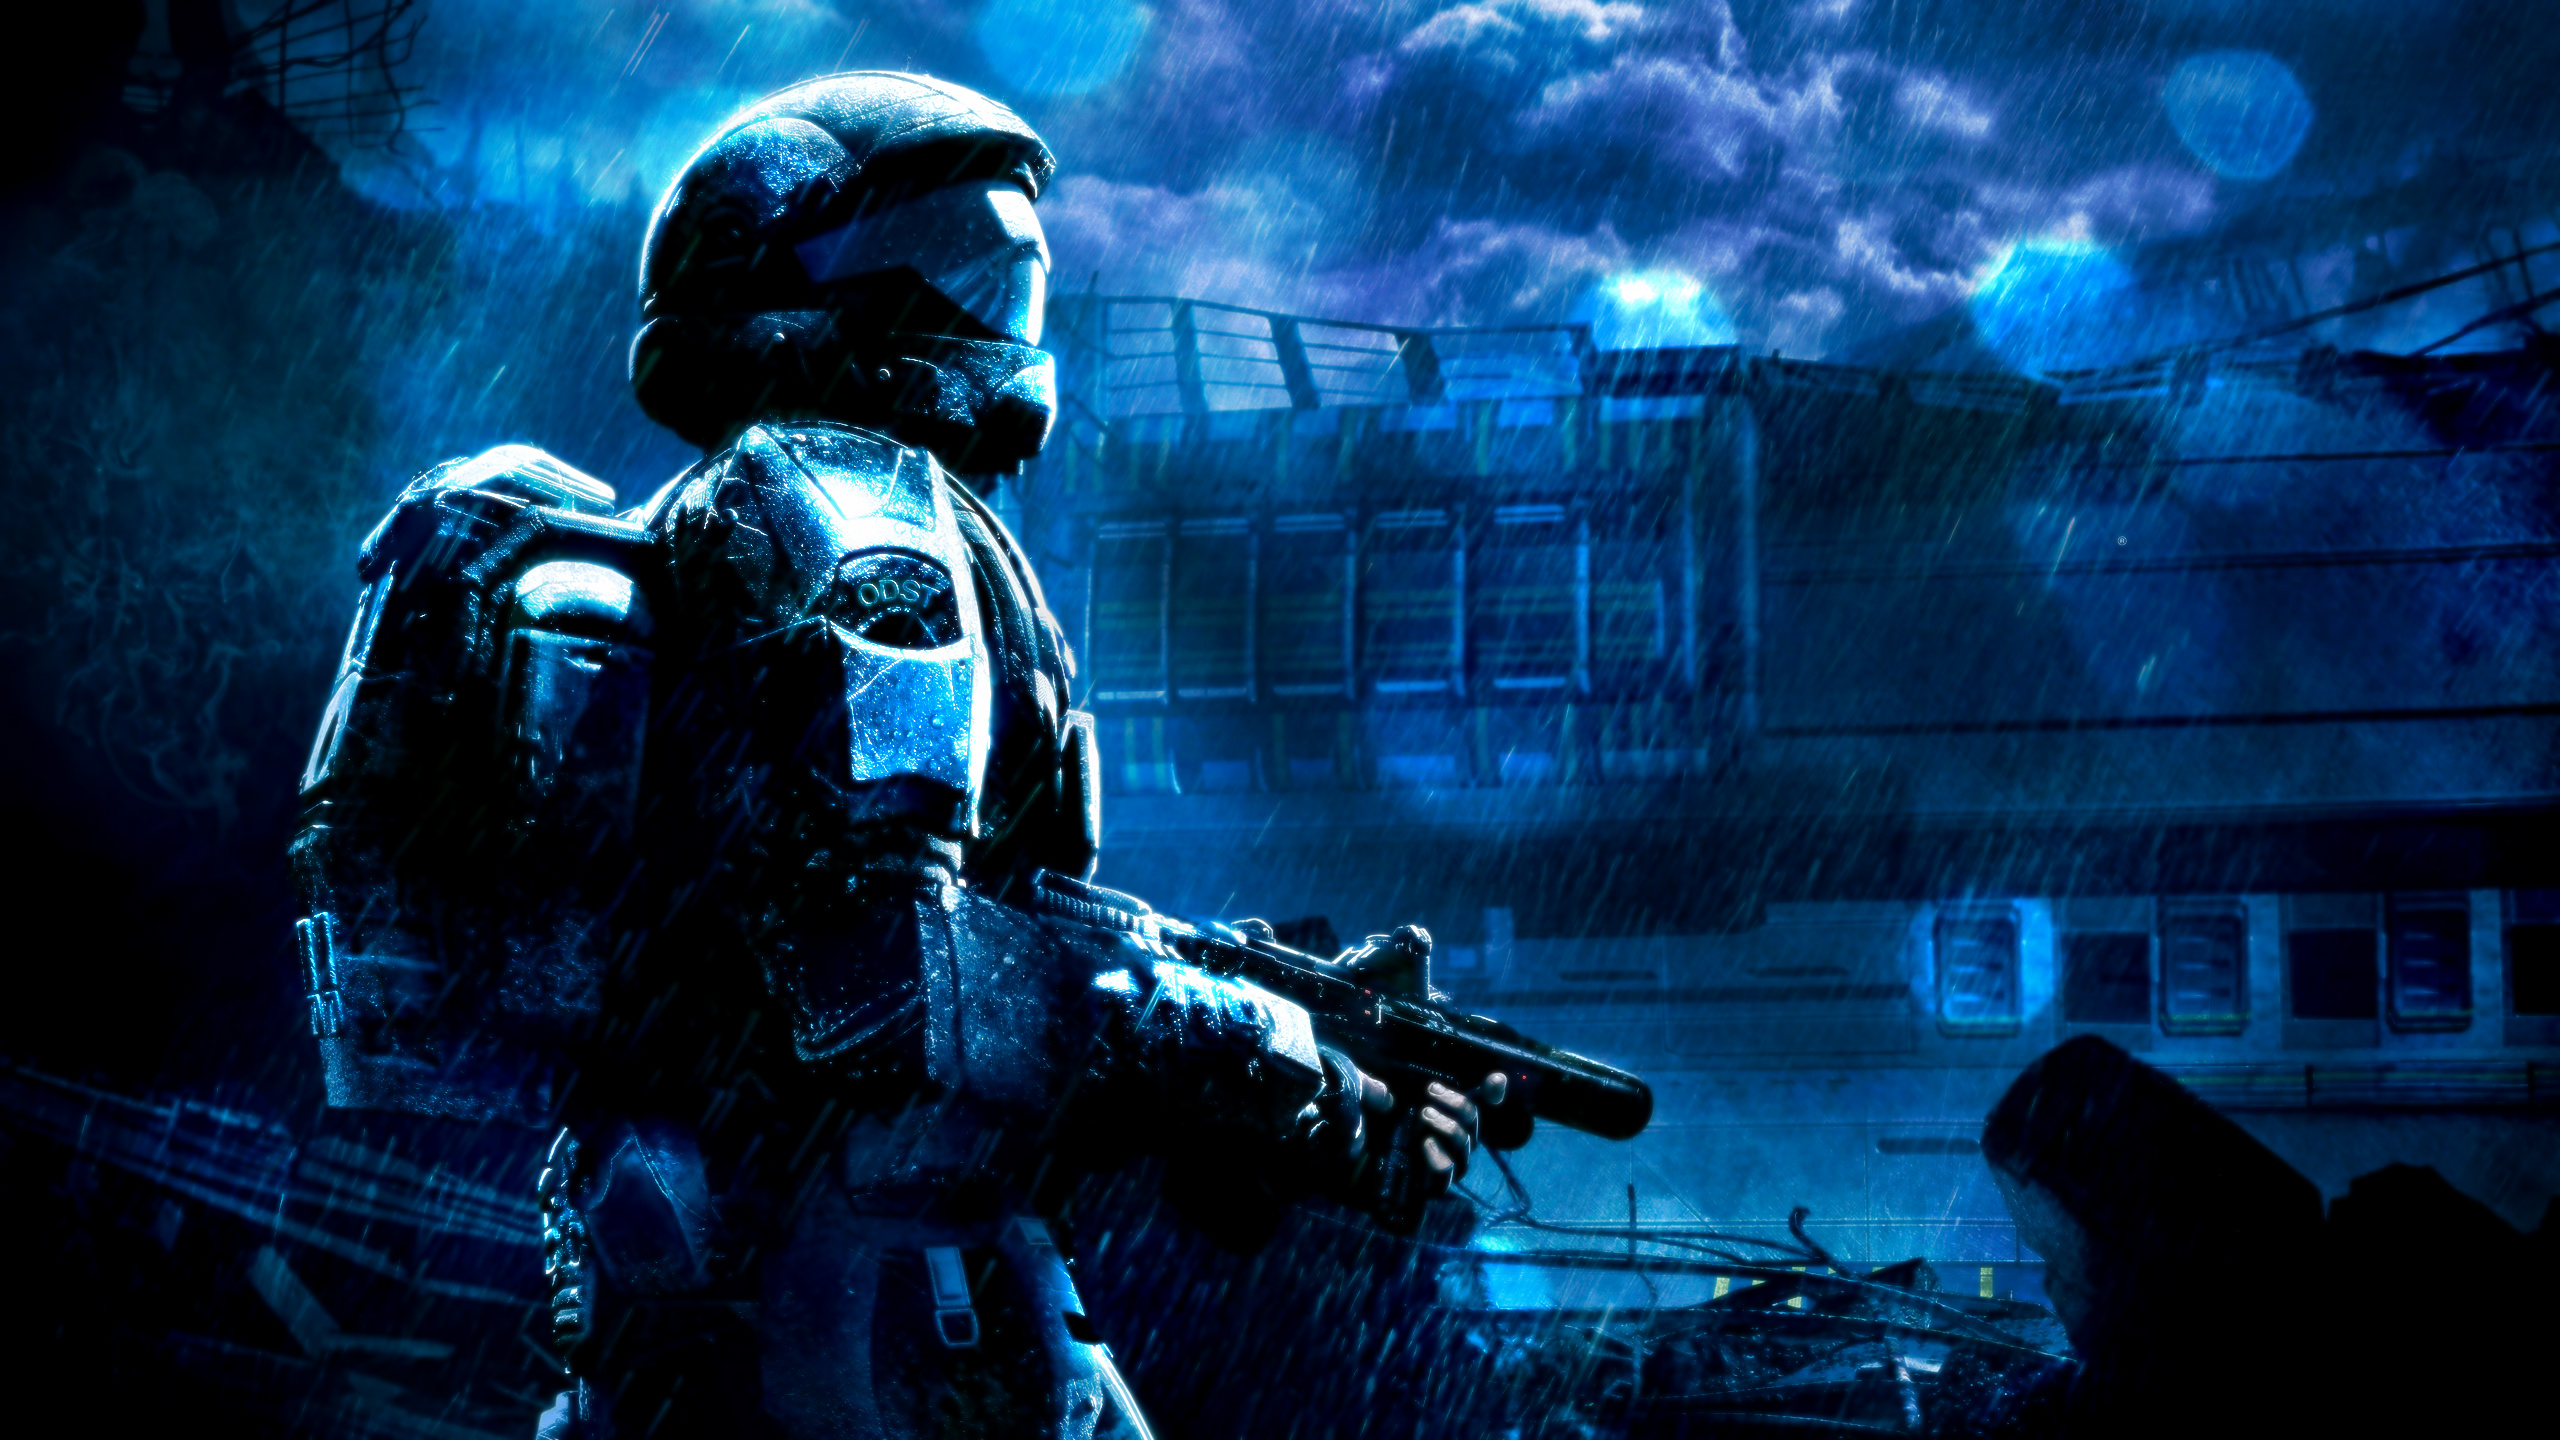 7 Halo 3: ODST HD Wallpapers | Backgrounds - Wallpaper Abyss